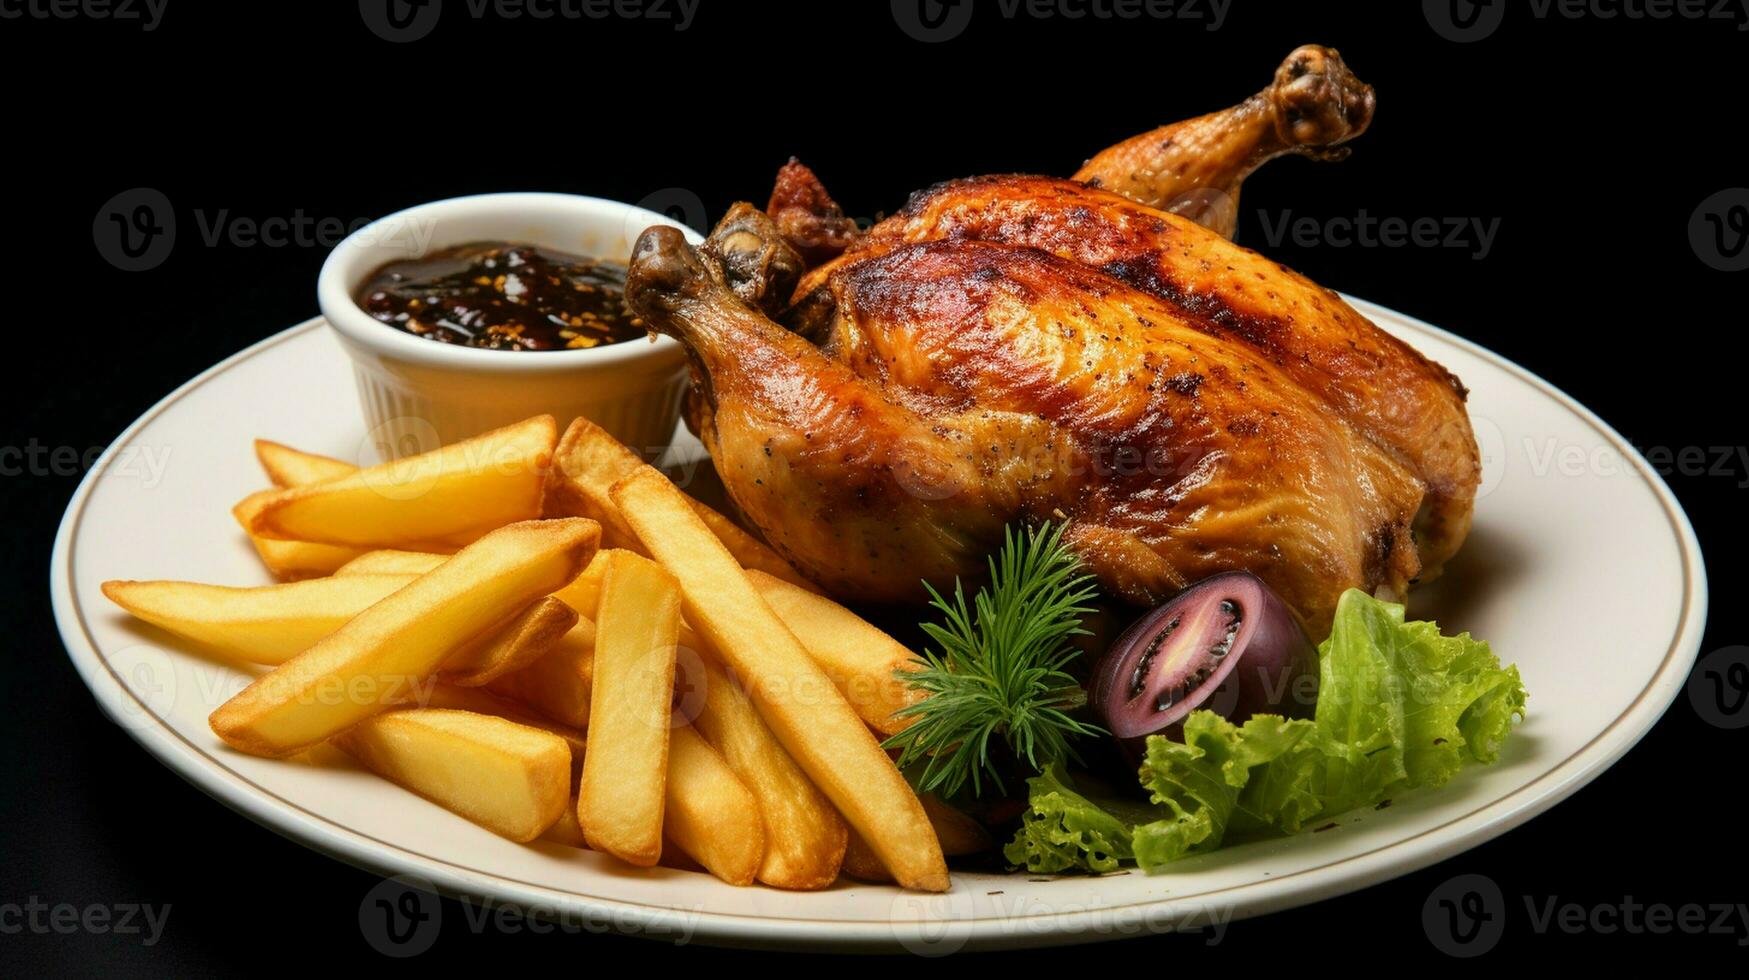 Roasted half chicken with crispy golden brown skin served with fresh salad and french fries. photo